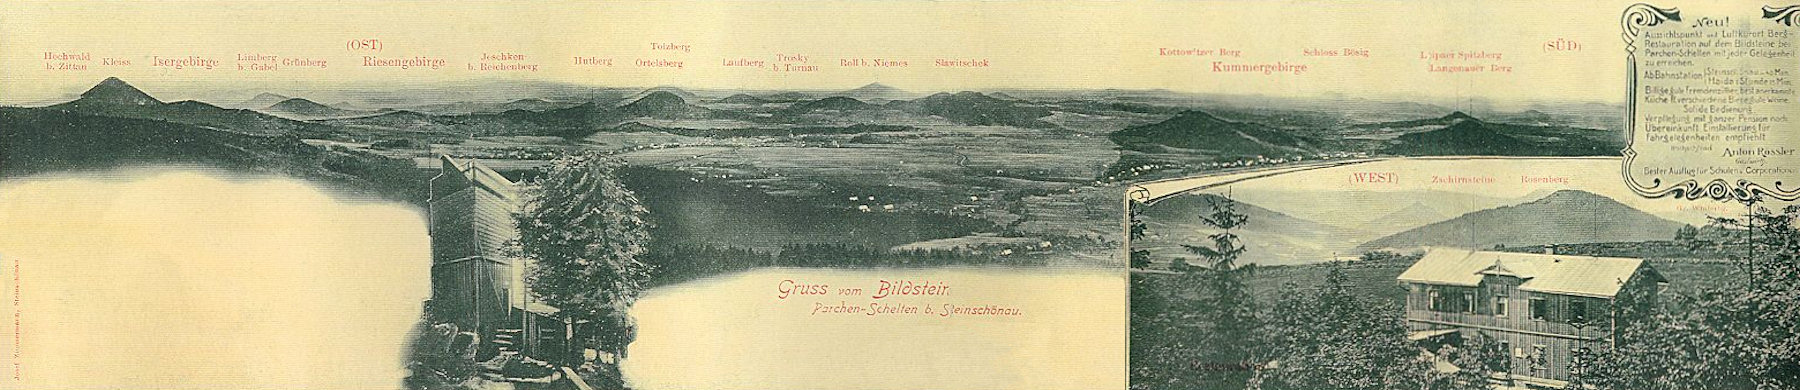 This folded picture postcard shows the southeastern, most beautiful southeastern part of the view from the Obrázek-hill near Prácheň. The most prominent hill to the left is the Klíč, the horizon behind of it is closed by the Jizerské hory-Mts. and the Krkonoše-Mts. Moreover, the picture shows e.g. the hills Ortel, Tlustec, Ralsko, Chotovický vrch, Skalický vrch, and Bezděz. The pictures below show the wooden lookout-tower and the nearby restaurant.